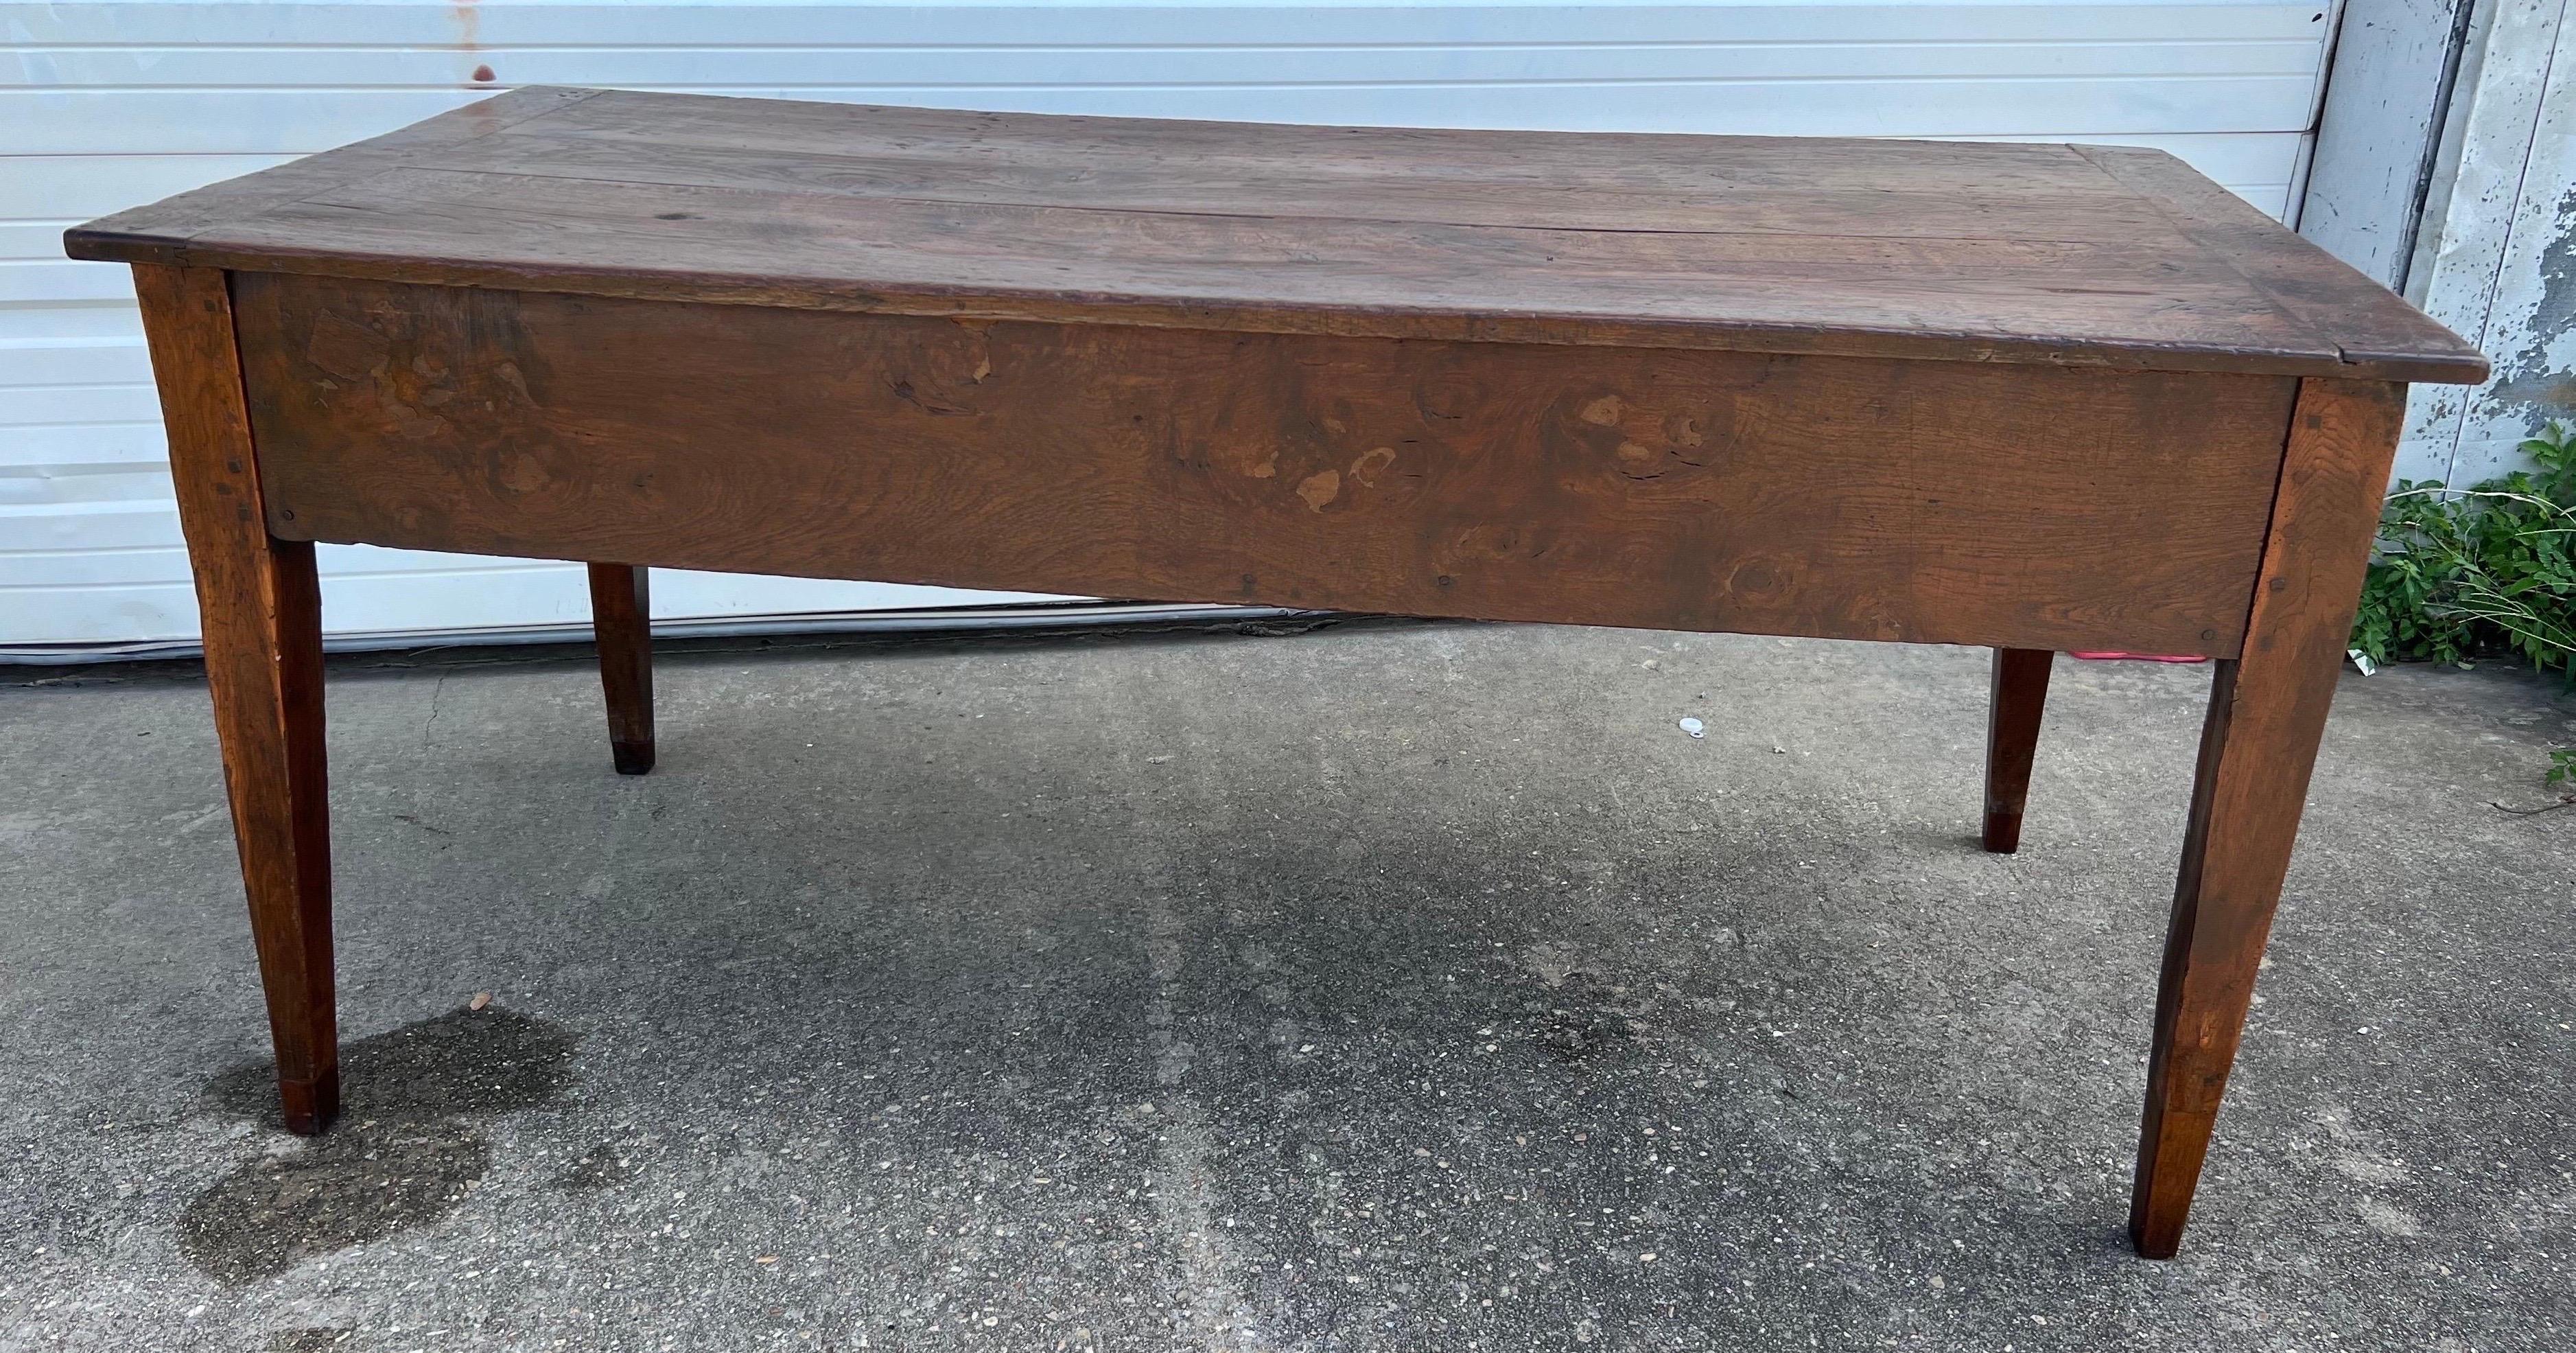 Nice rustic French provincial farm table with drawers on each end. Very charming old patches and patina throughout. Would make a great console or prep table on addition to dining. Leg clearance is 22”.